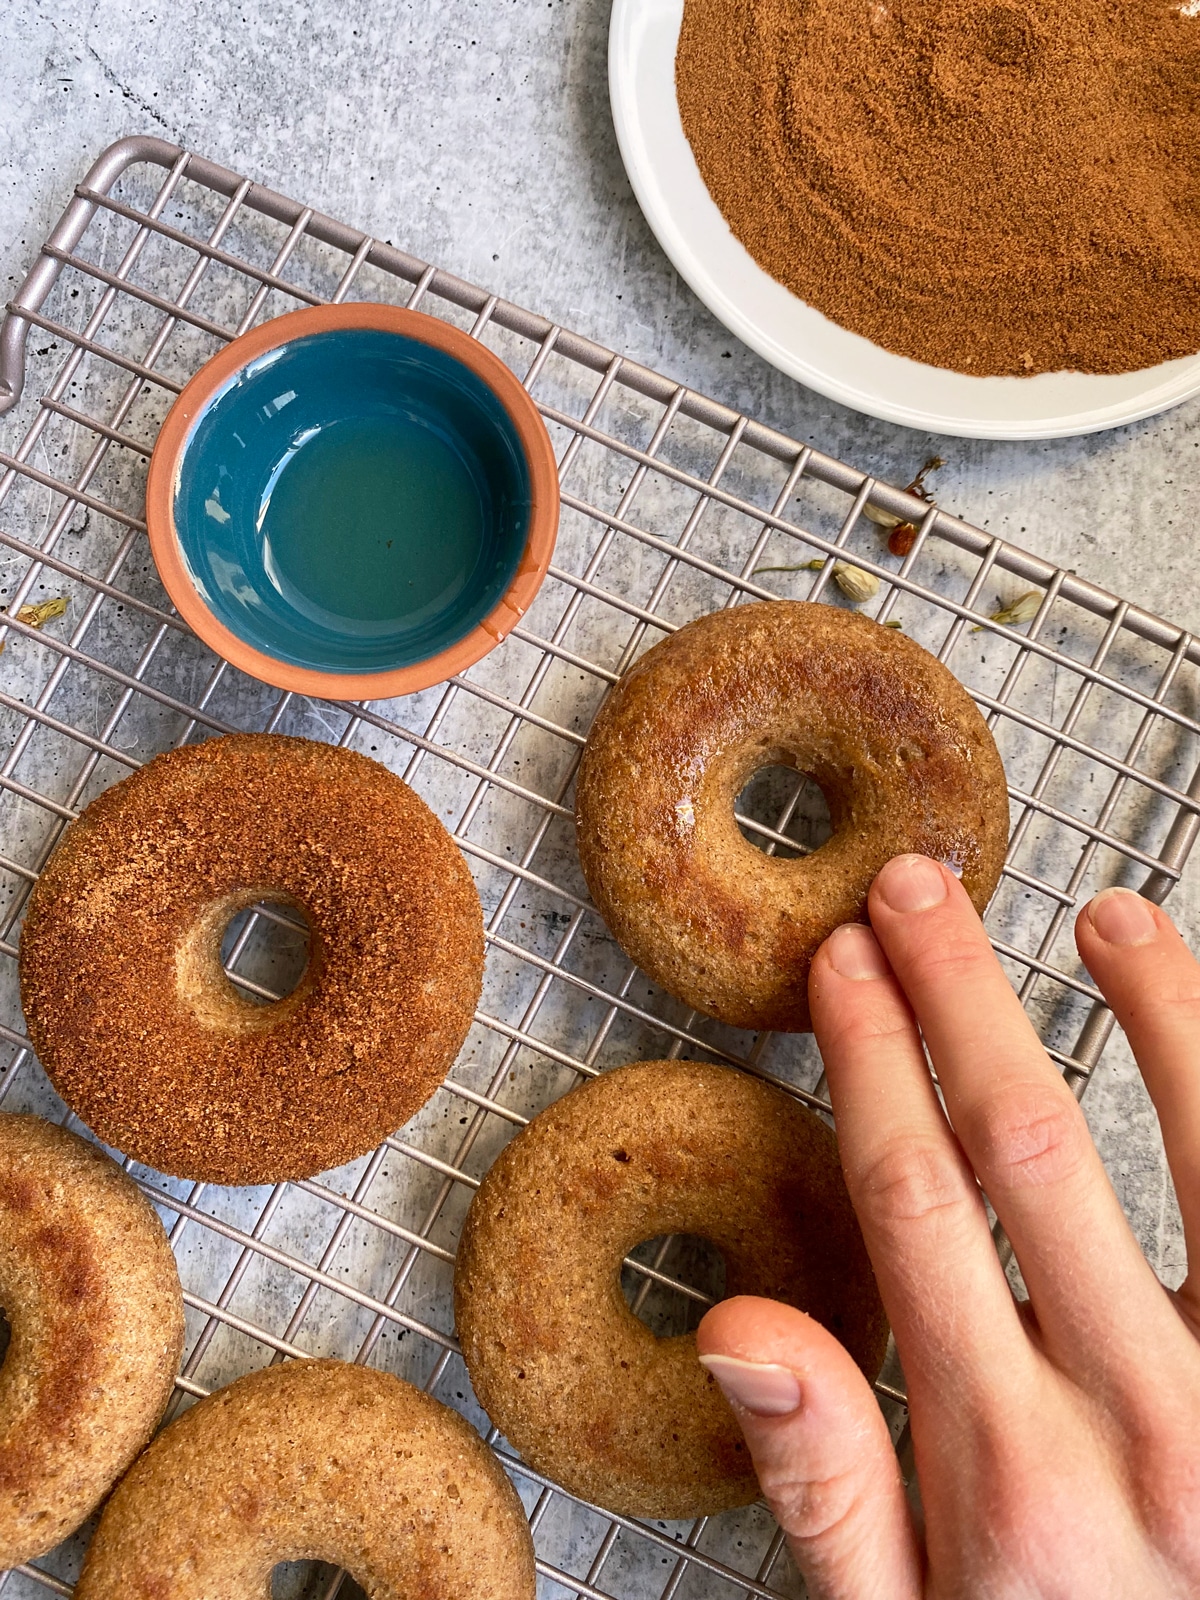 coating the donuts in avocado oil so that the cinnamon sugar mixture will stick